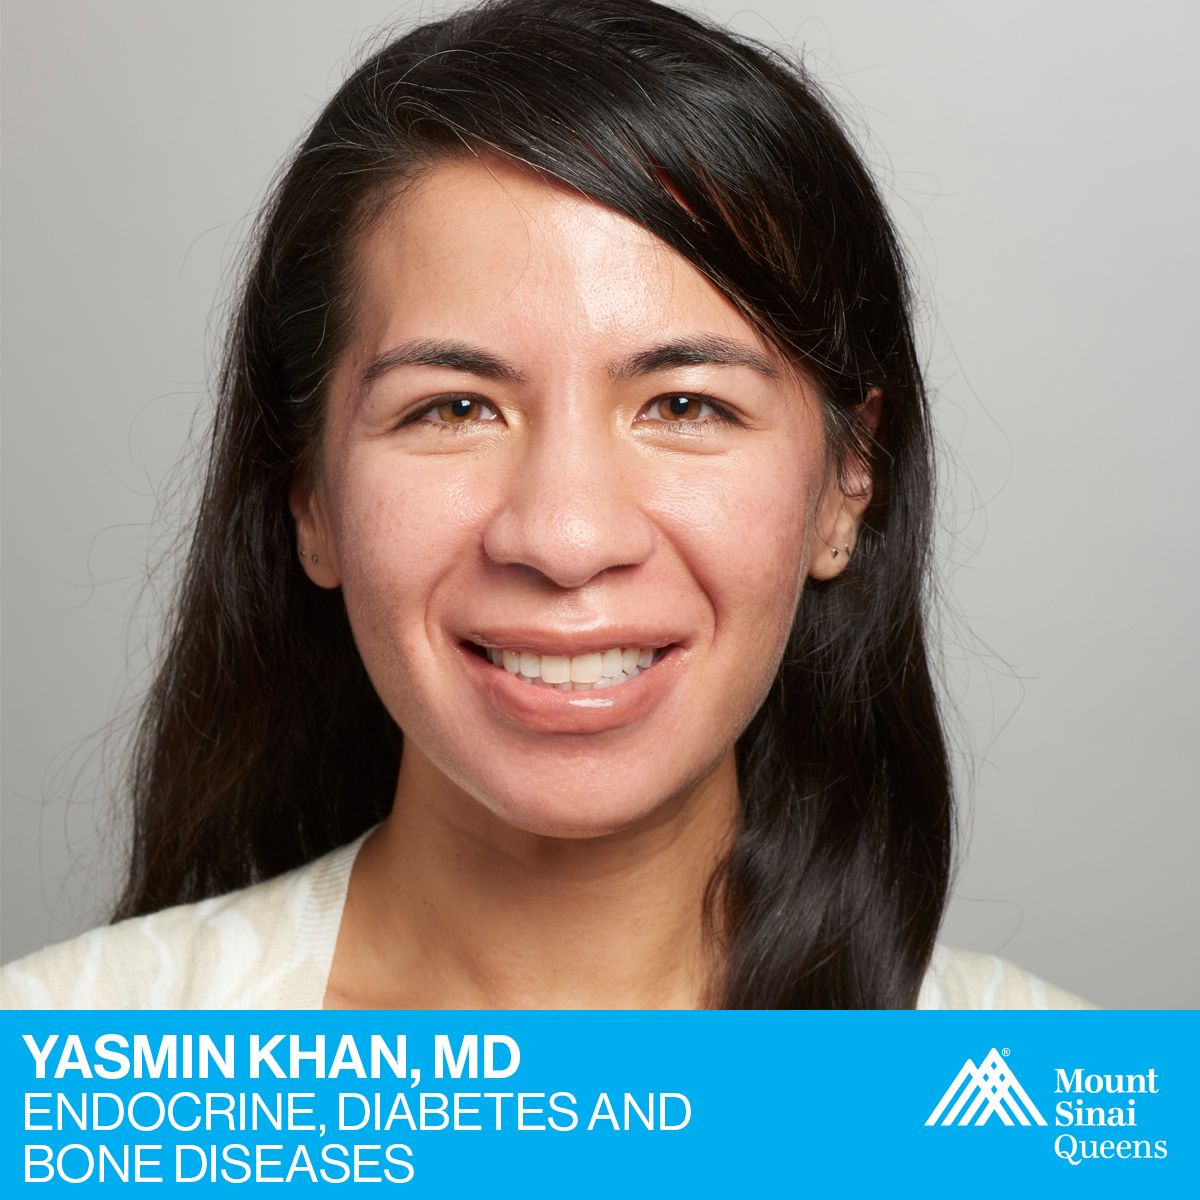 Dr. Yasmin Khan treats a wide variety of glandular and hormonal conditions such as #diabetes, thyroid and parathyroid disorders, thyroid nodules, thyroid cancer, and osteoporosis. To make an appointment, please call 718-808-7777. #AmericanDiabetesMonth bit.ly/49n6DUU